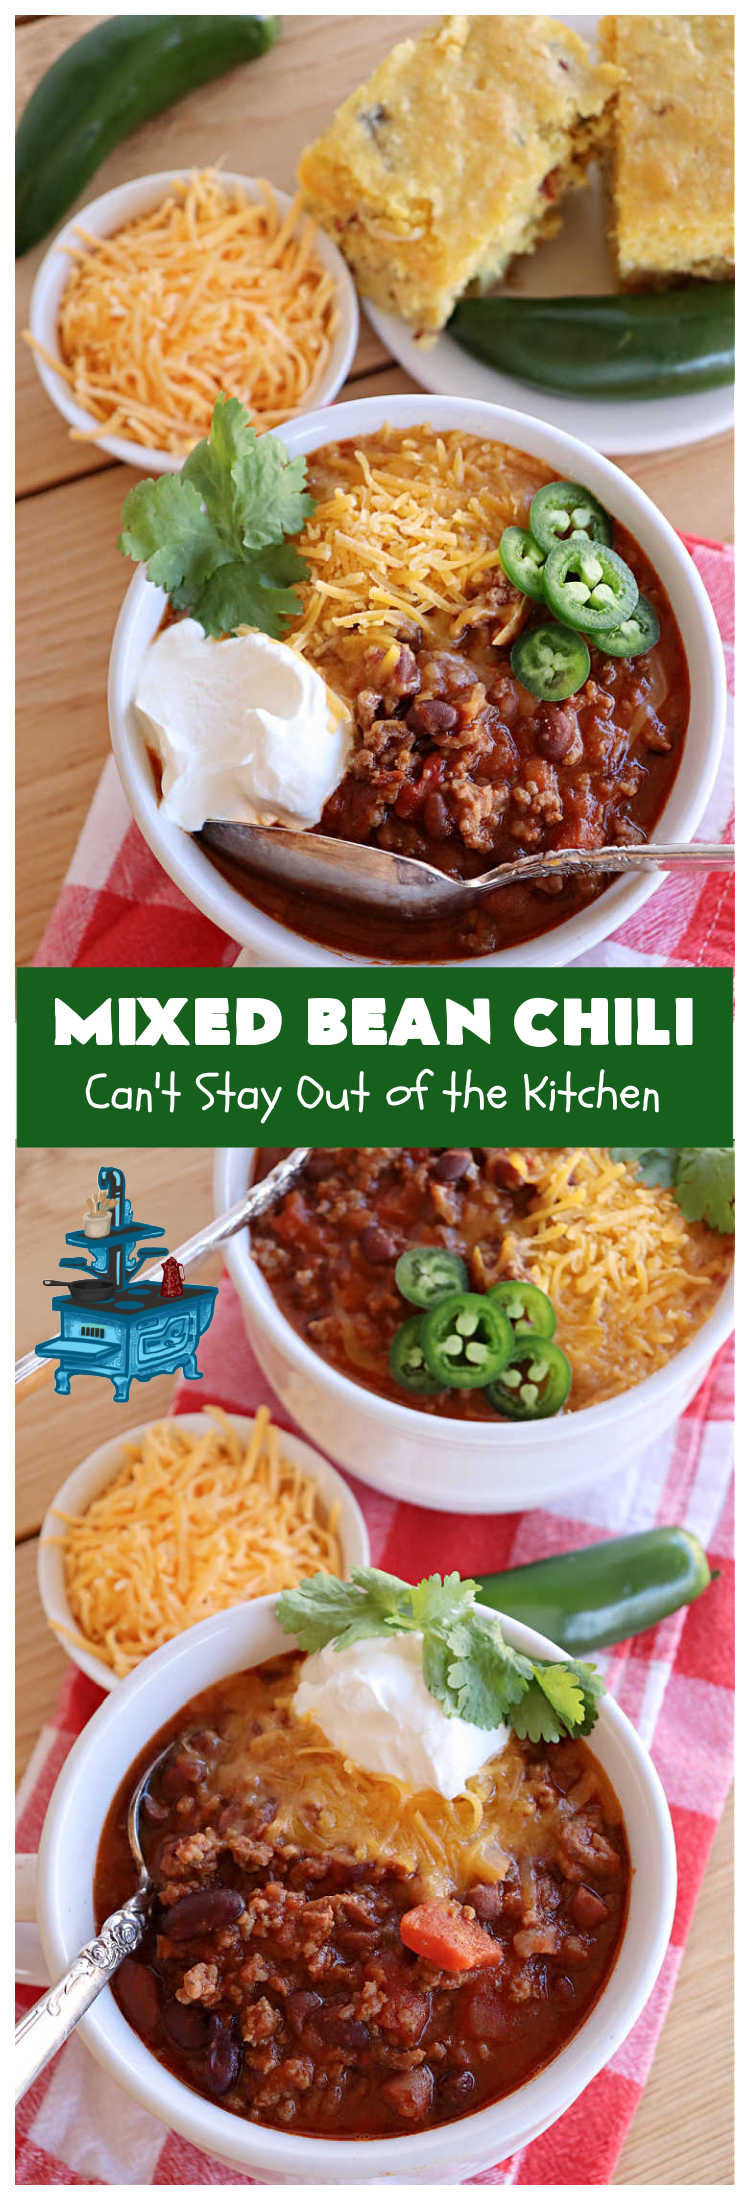 Mixed Bean Chili | Can't Stay Out of the Kitchen | this favorite #chili #recipe is extra meaty using lean #GroundBeef & sweet #ItalianSausage. This #SlowCooker chili is terrific for company dinners or #tailgating parties since it makes a lot. #BlackBeans #RedKidneyBeans #PintoBeans #tomatoes #GlutenFree #JalapenoPepper #MixedBeanChili